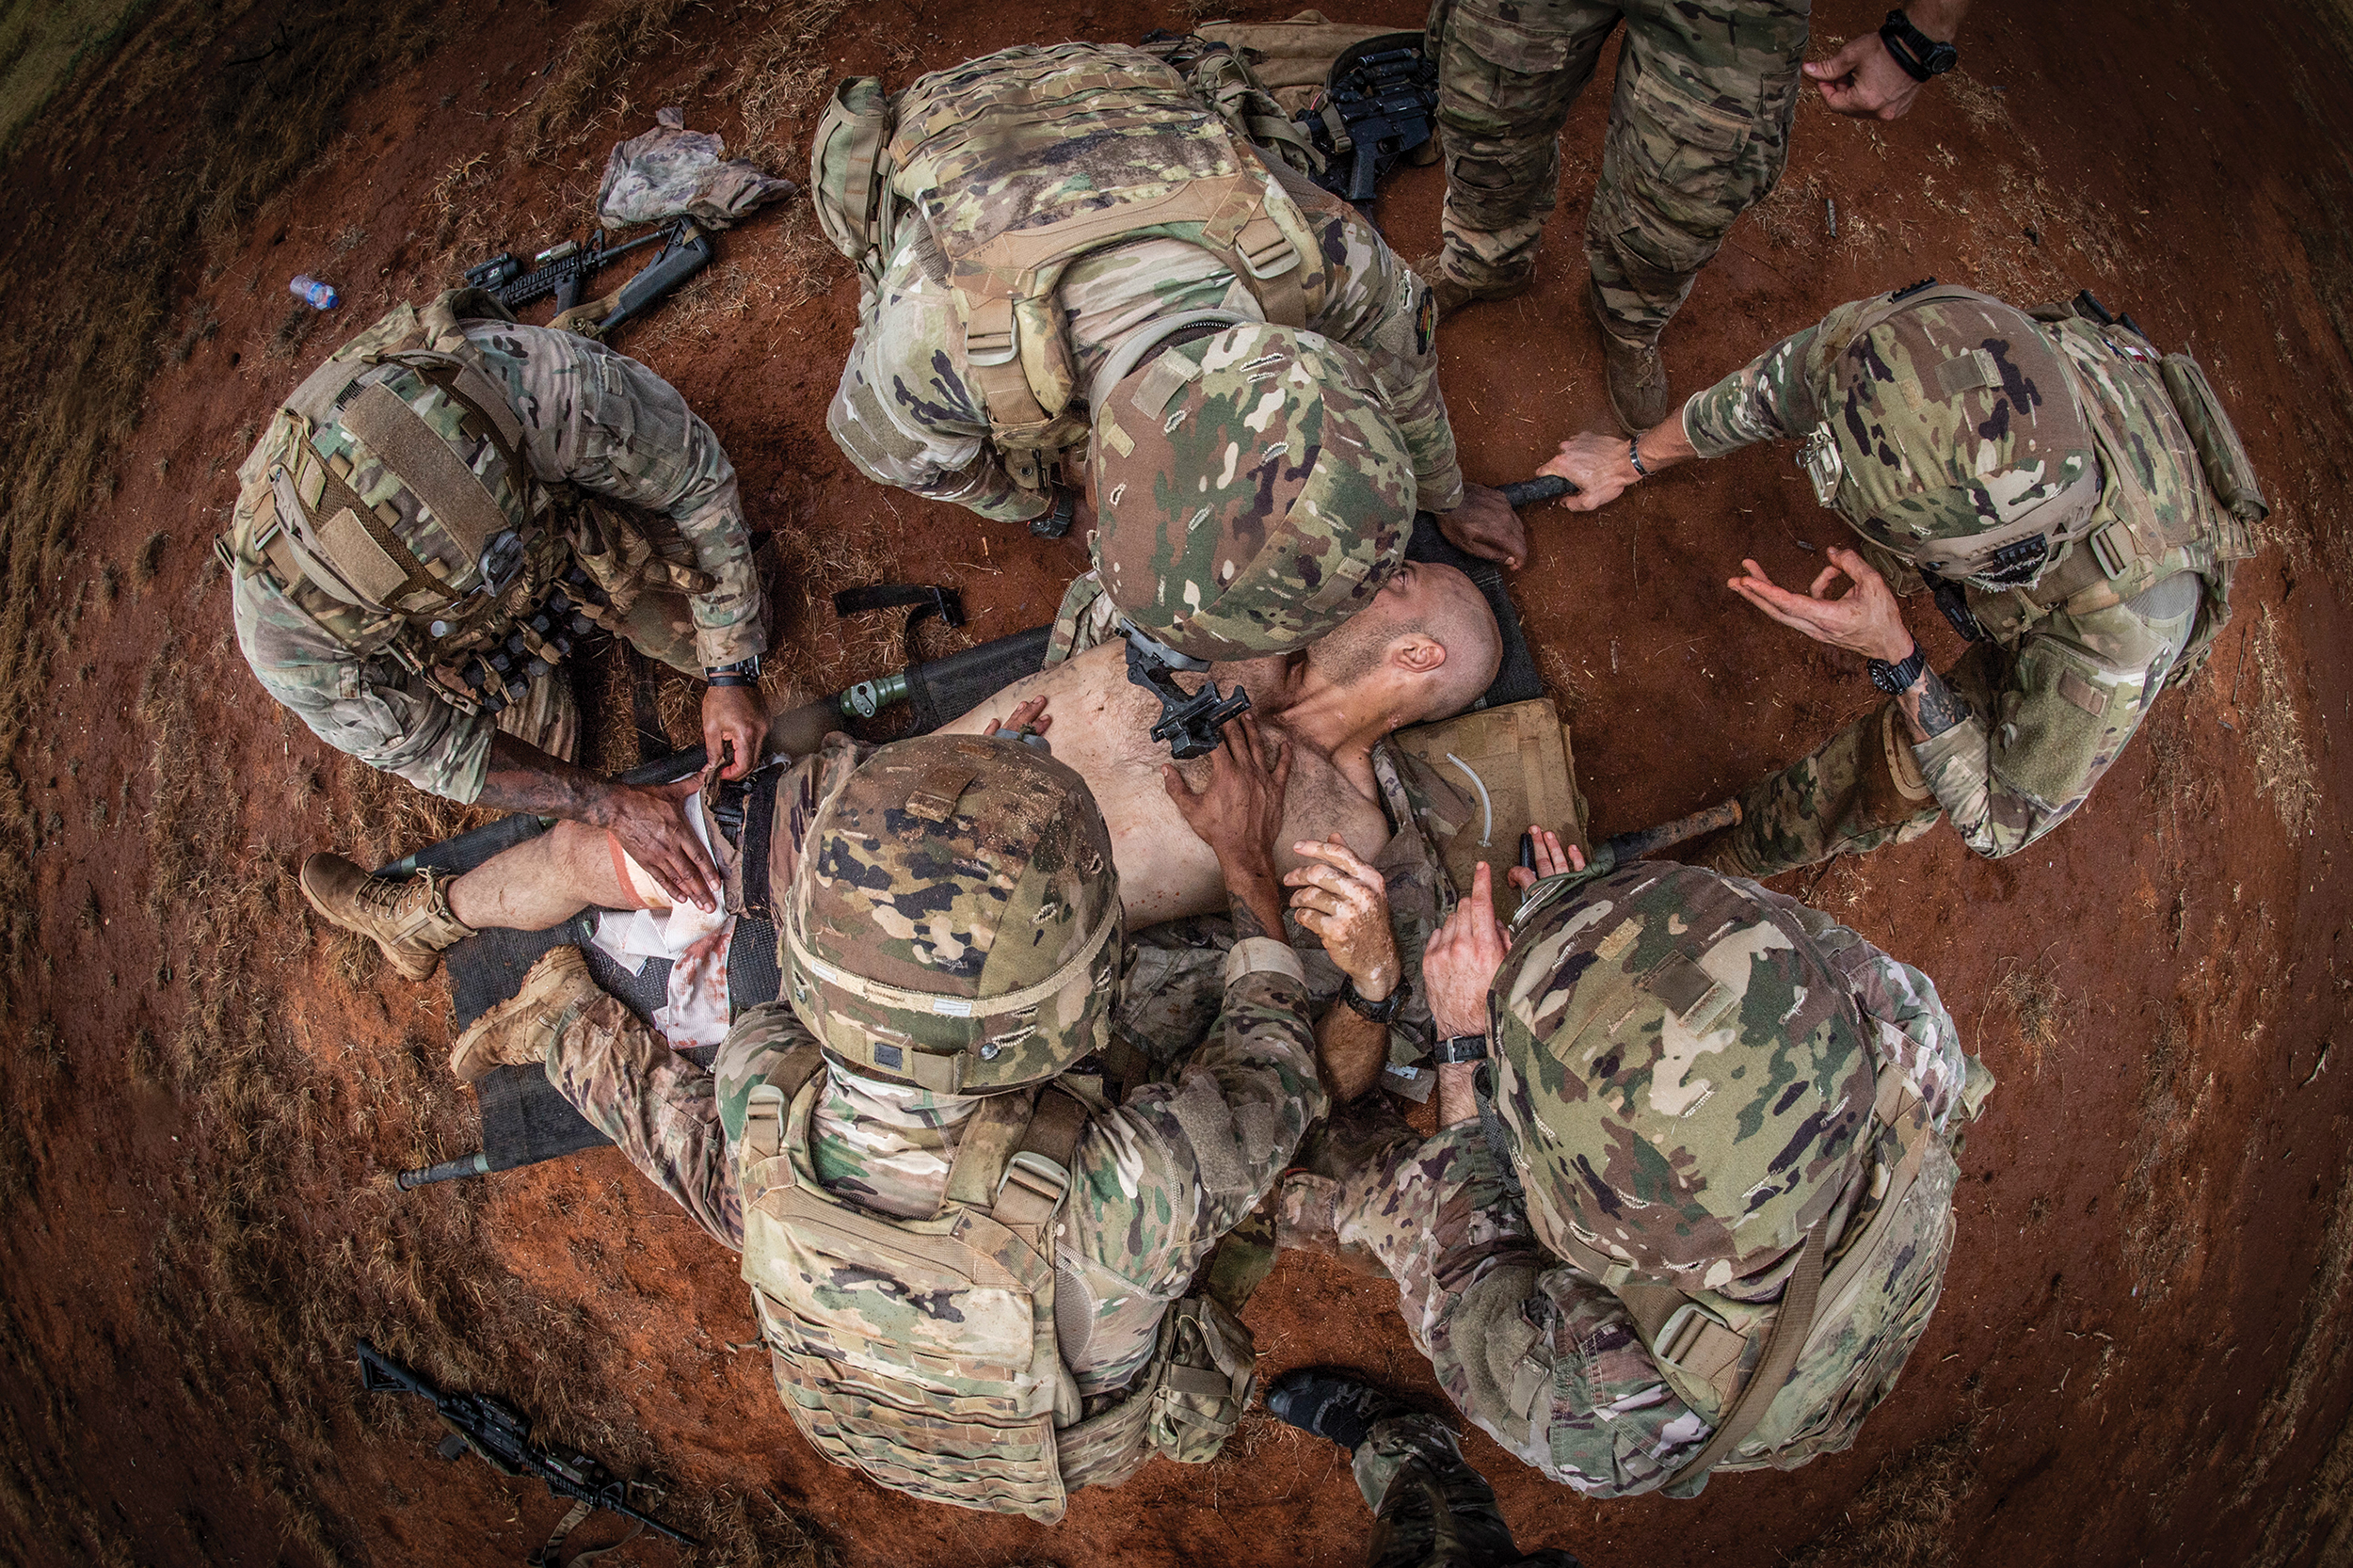 Special Amphibious Reconnaissance Corpsmen assigned to November Company, 3rd Raider Battalion, provide tactical combat casualty care training to Soldiers of 1st Battalion, 102nd Cavalry Regiment, during routine deployment to Somalia